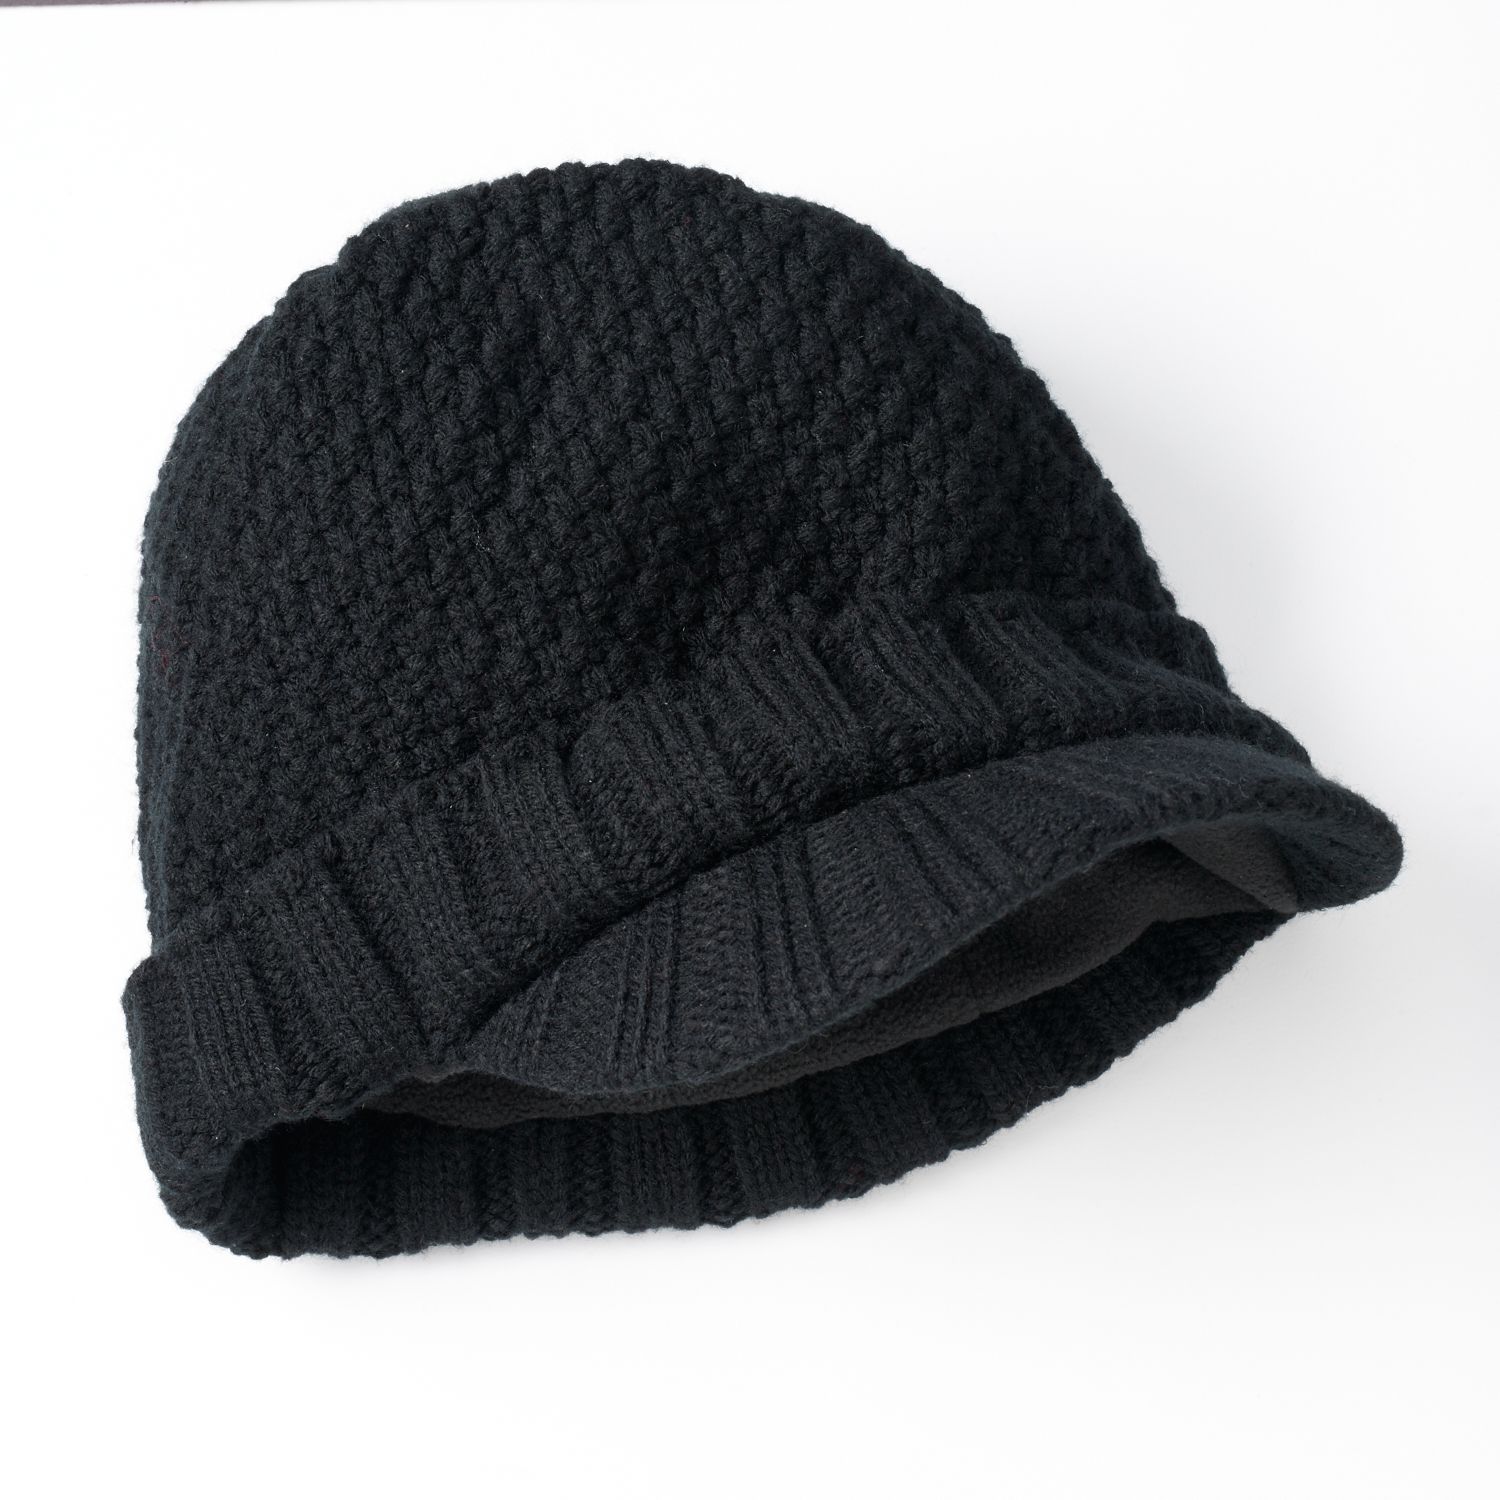 climawarm hat